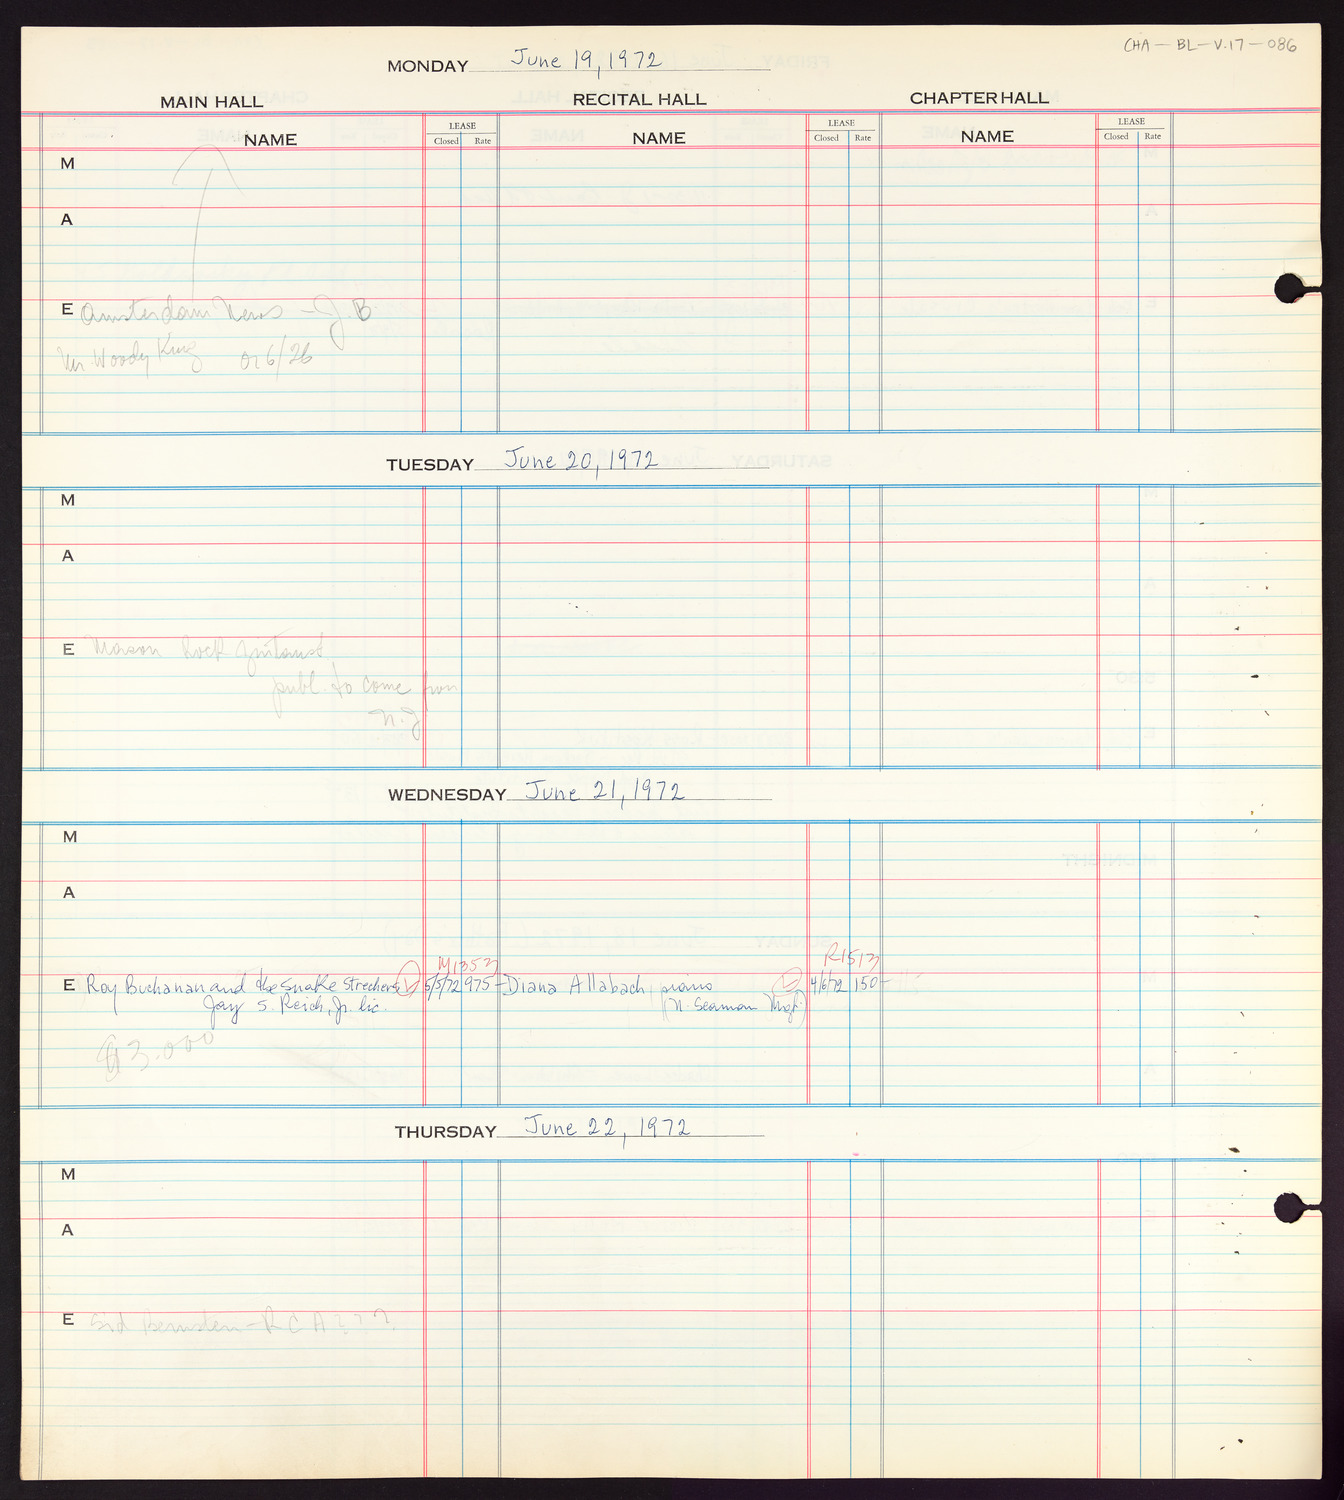 Carnegie Hall Booking Ledger, volume 17, page 86